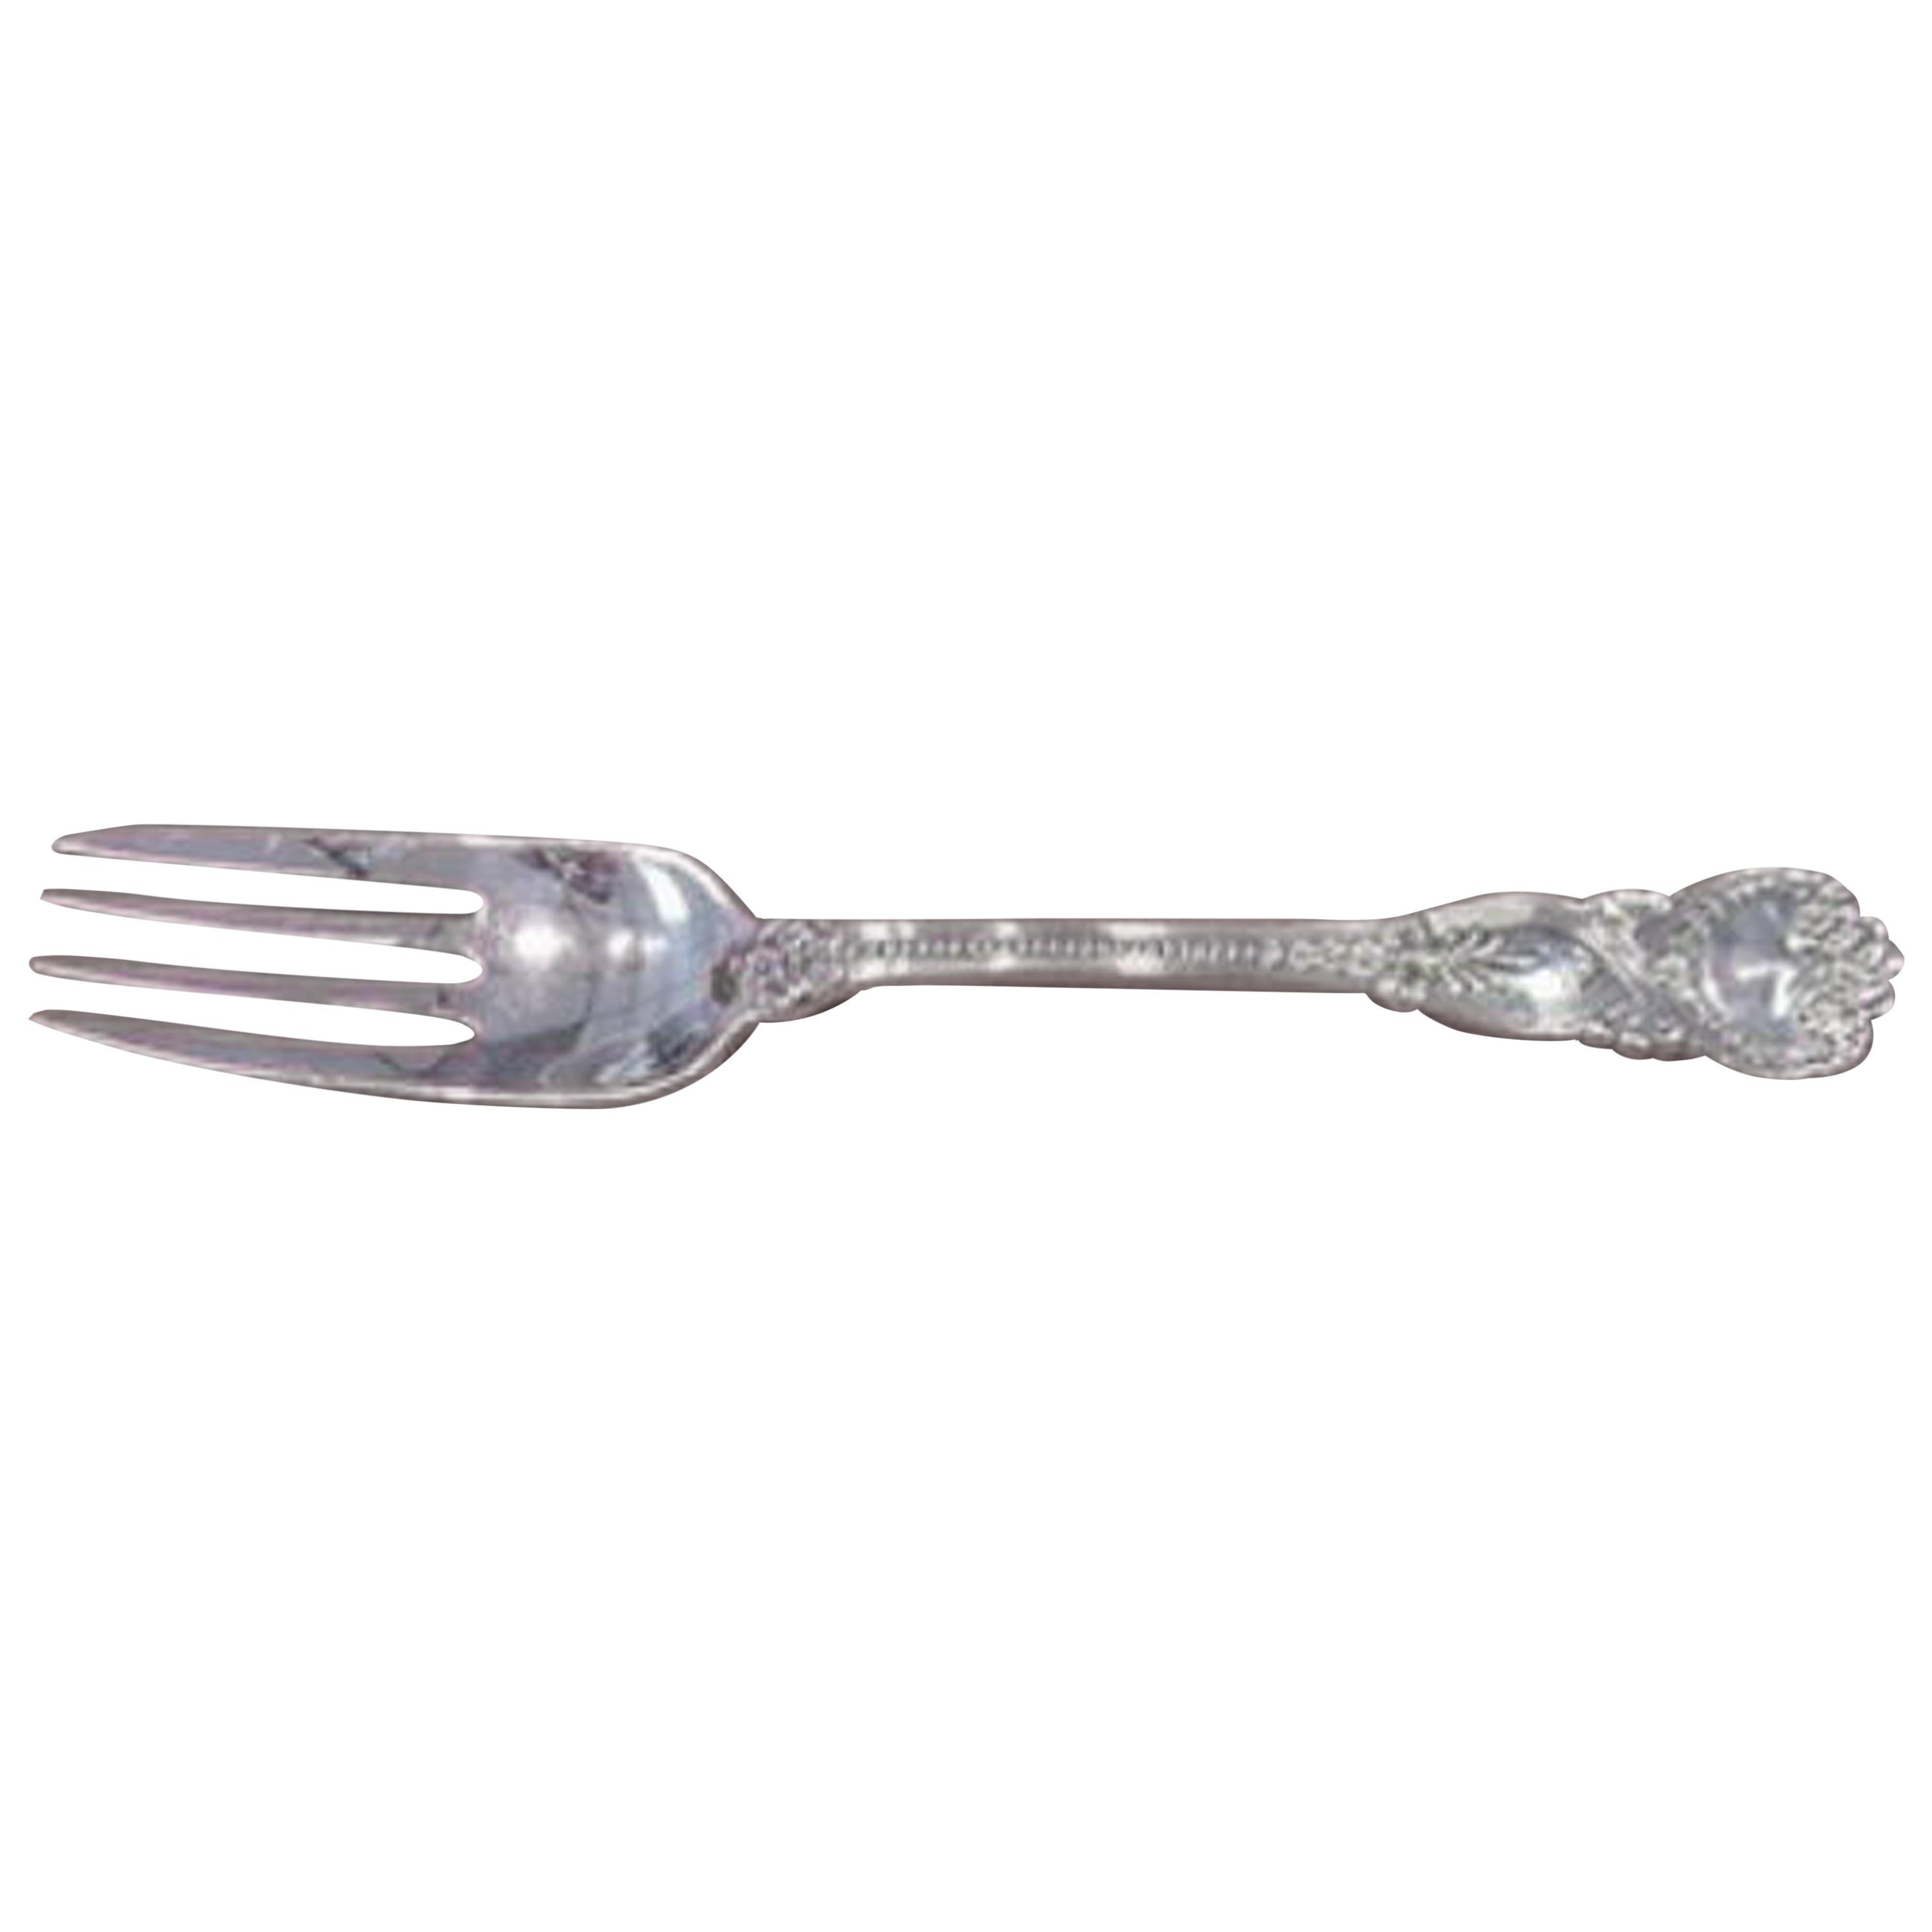 Saint James by Tiffany and Co Sterling Silver Dessert Fork 4-Tine Antique